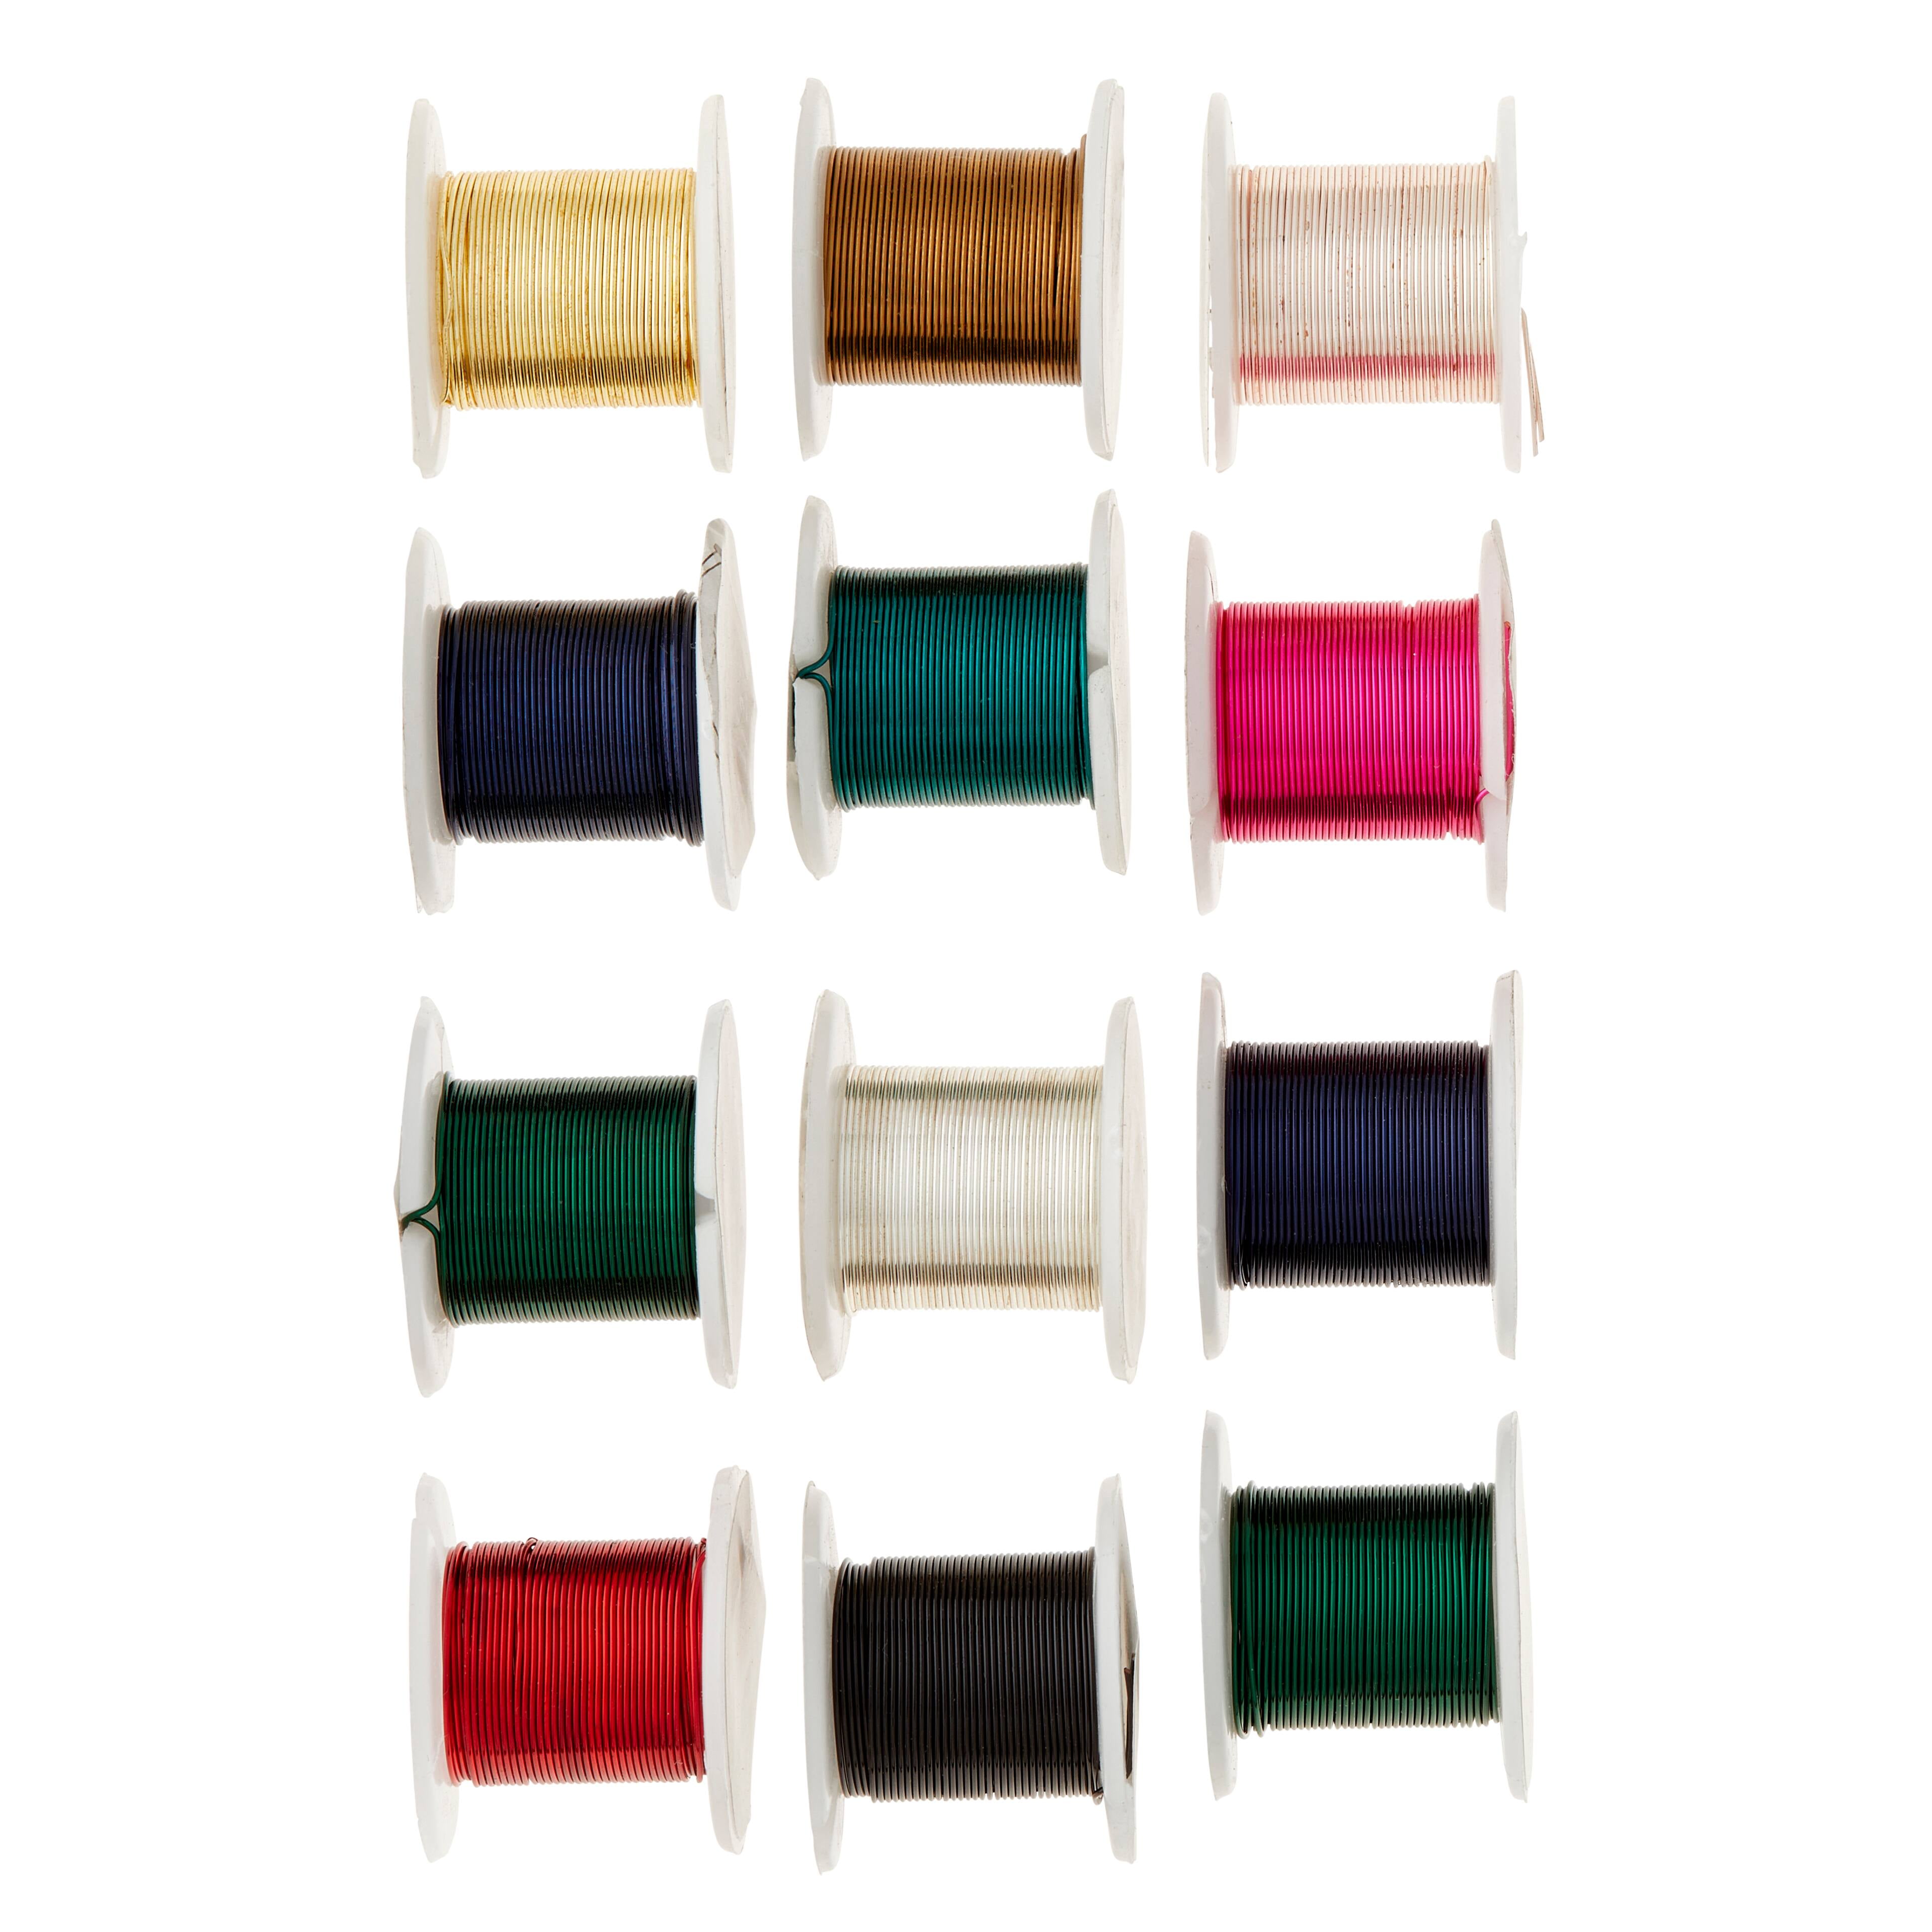 6 Packs: 12 ct. (72 total) Assorted Color Beading Wire by Bead